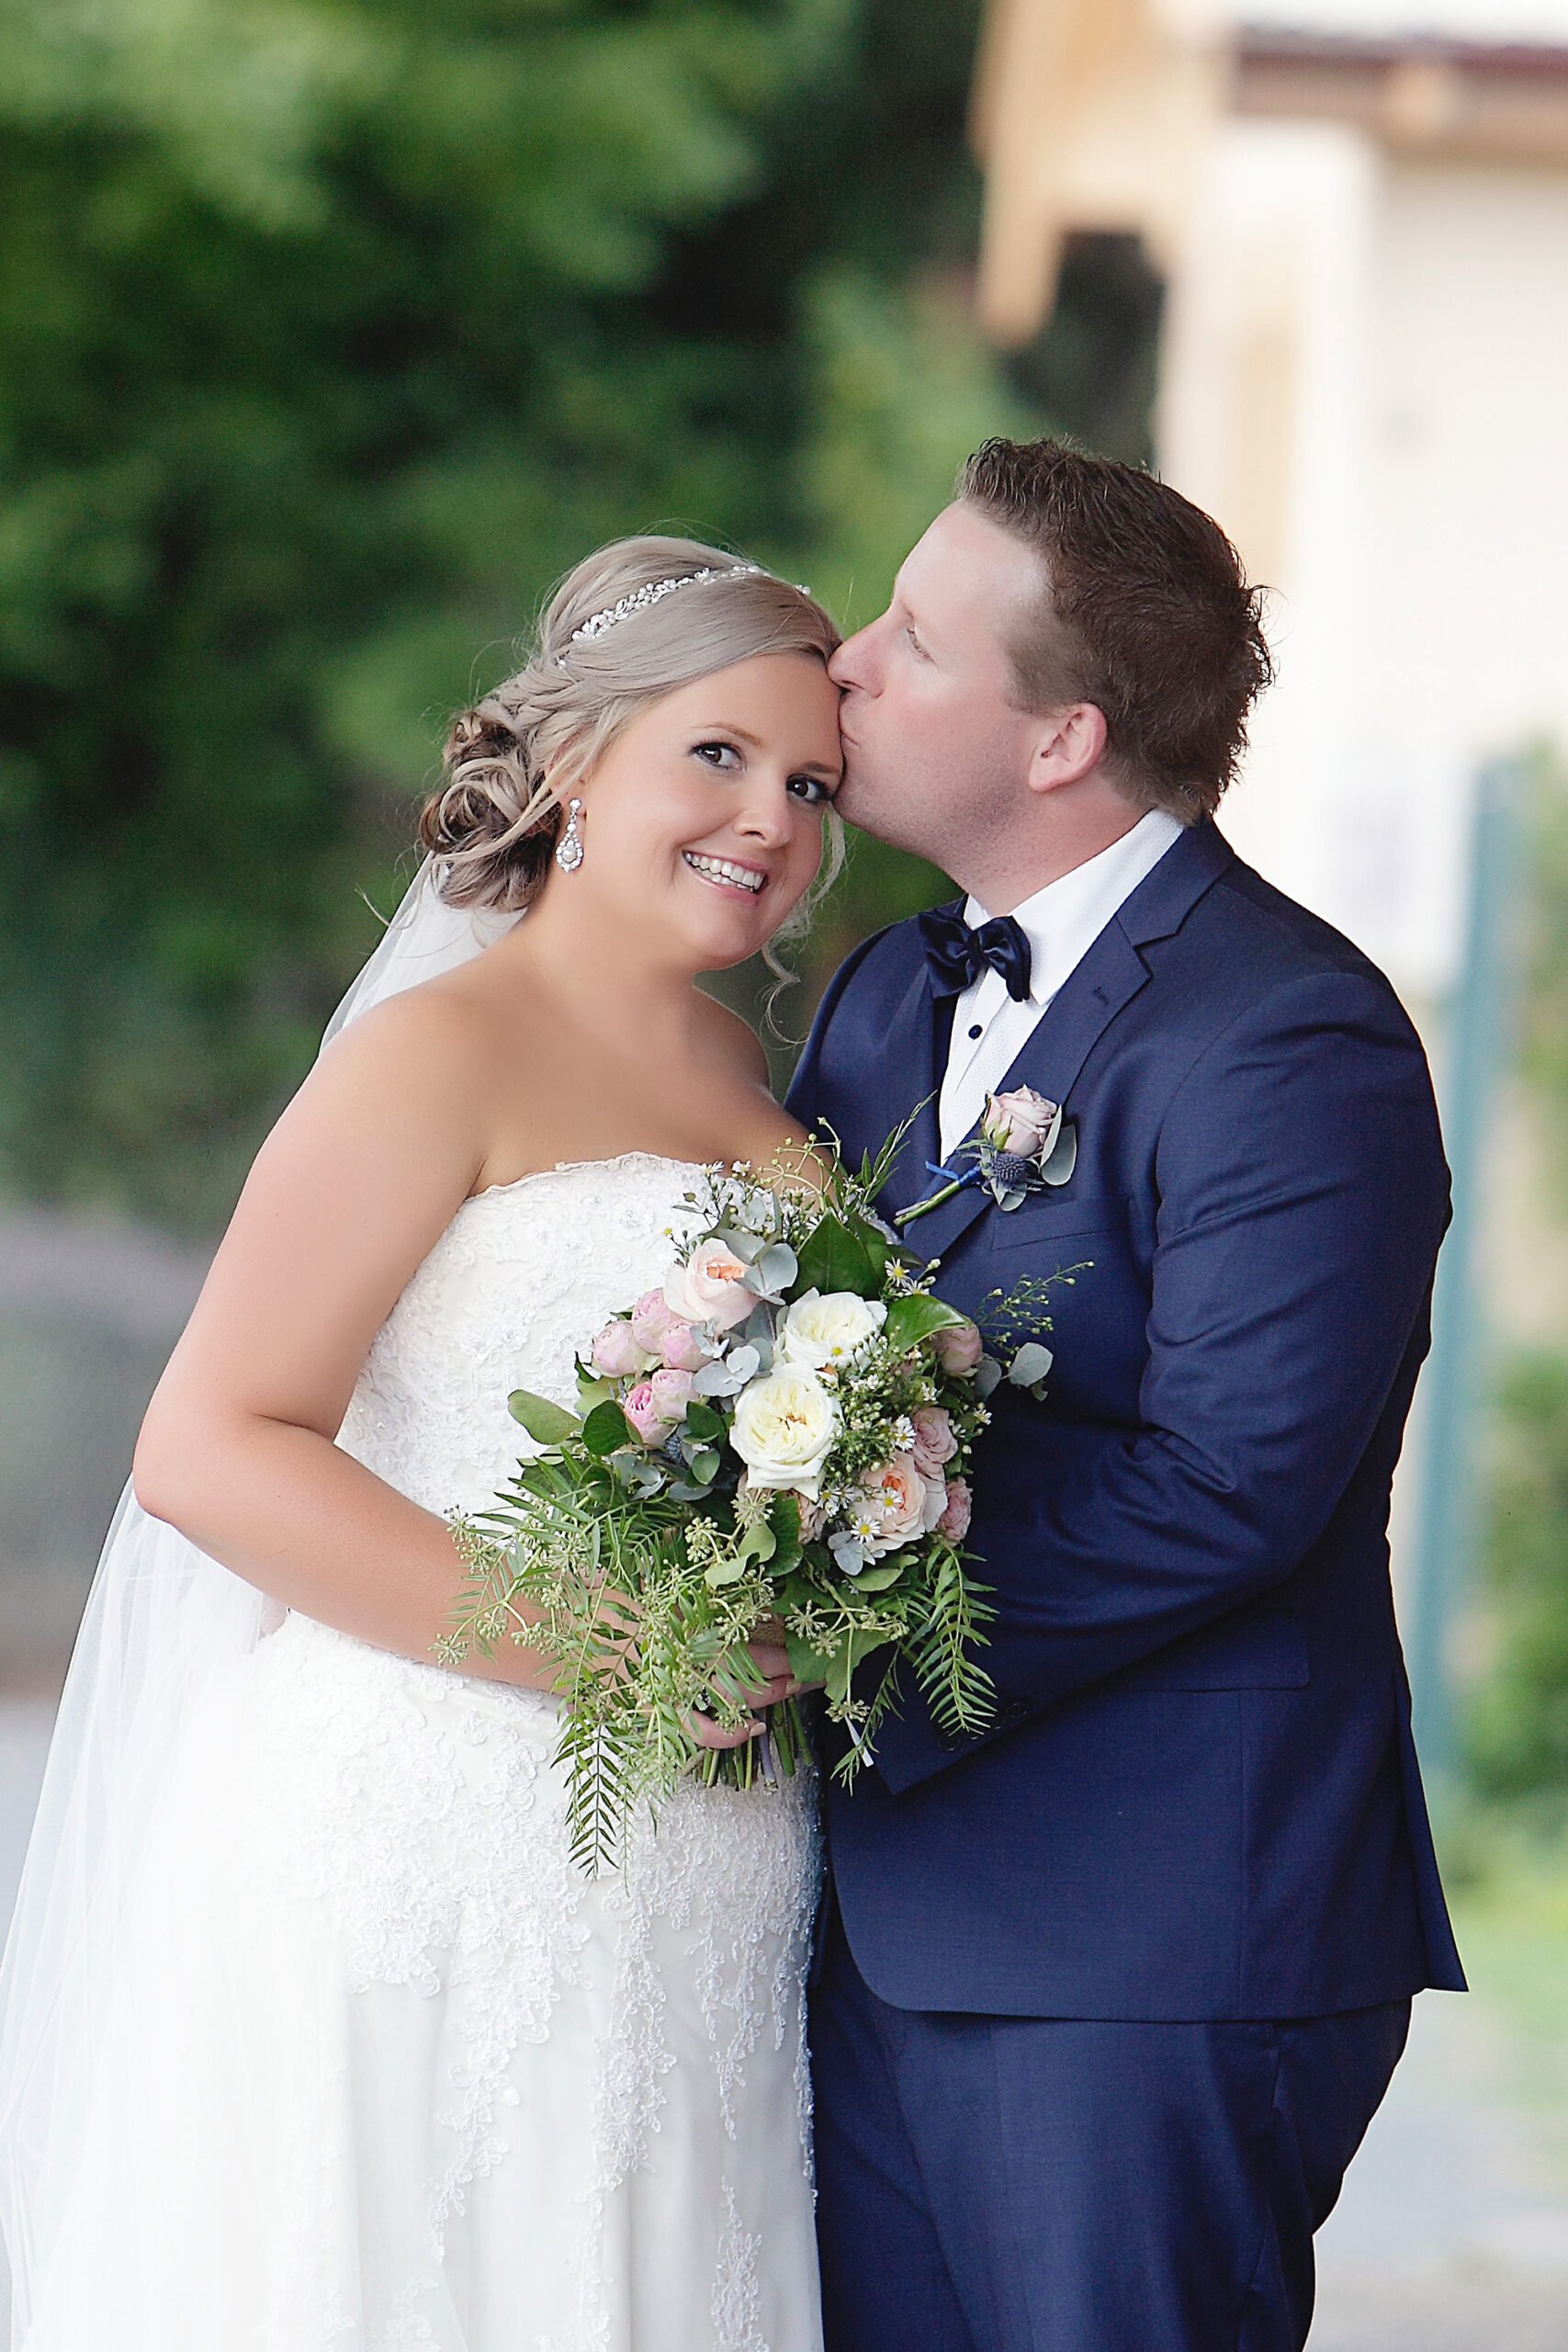 Jayne_Damian_Classic-Country-Wedding_Leanne-Whitley-Photography_SBS_008